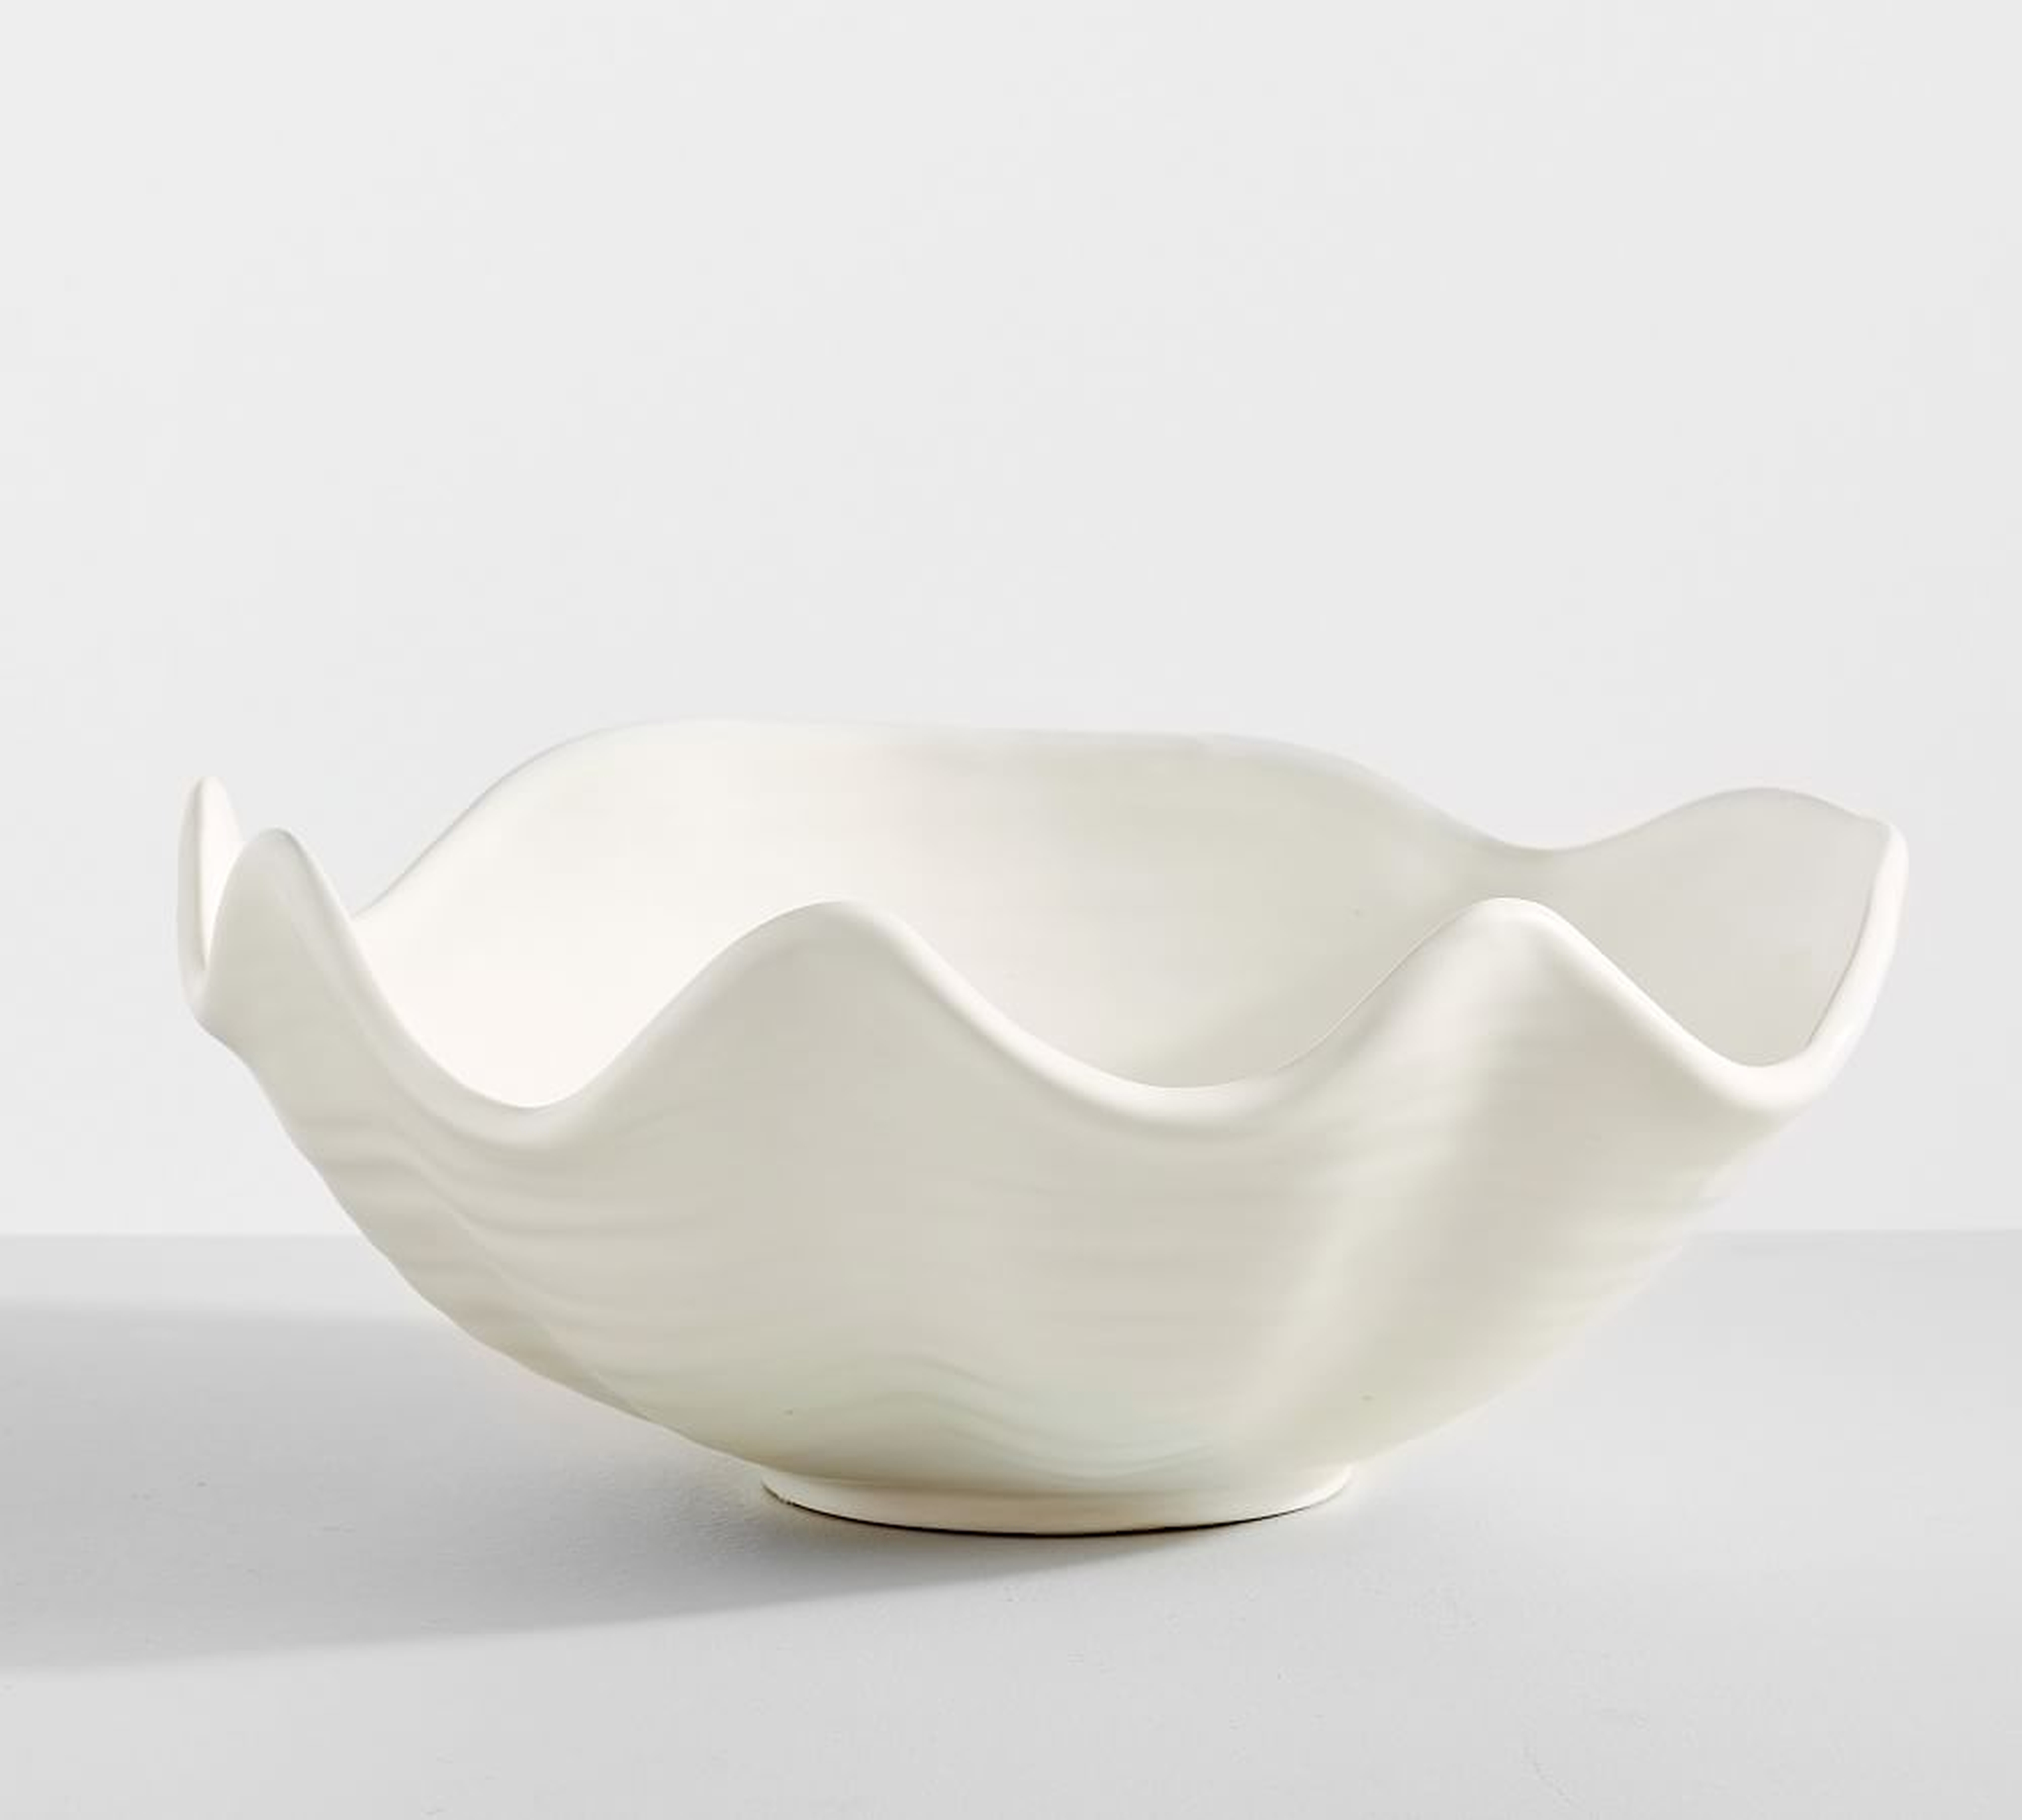 Handcrafted Ceramic Clam Bowl,White - Pottery Barn